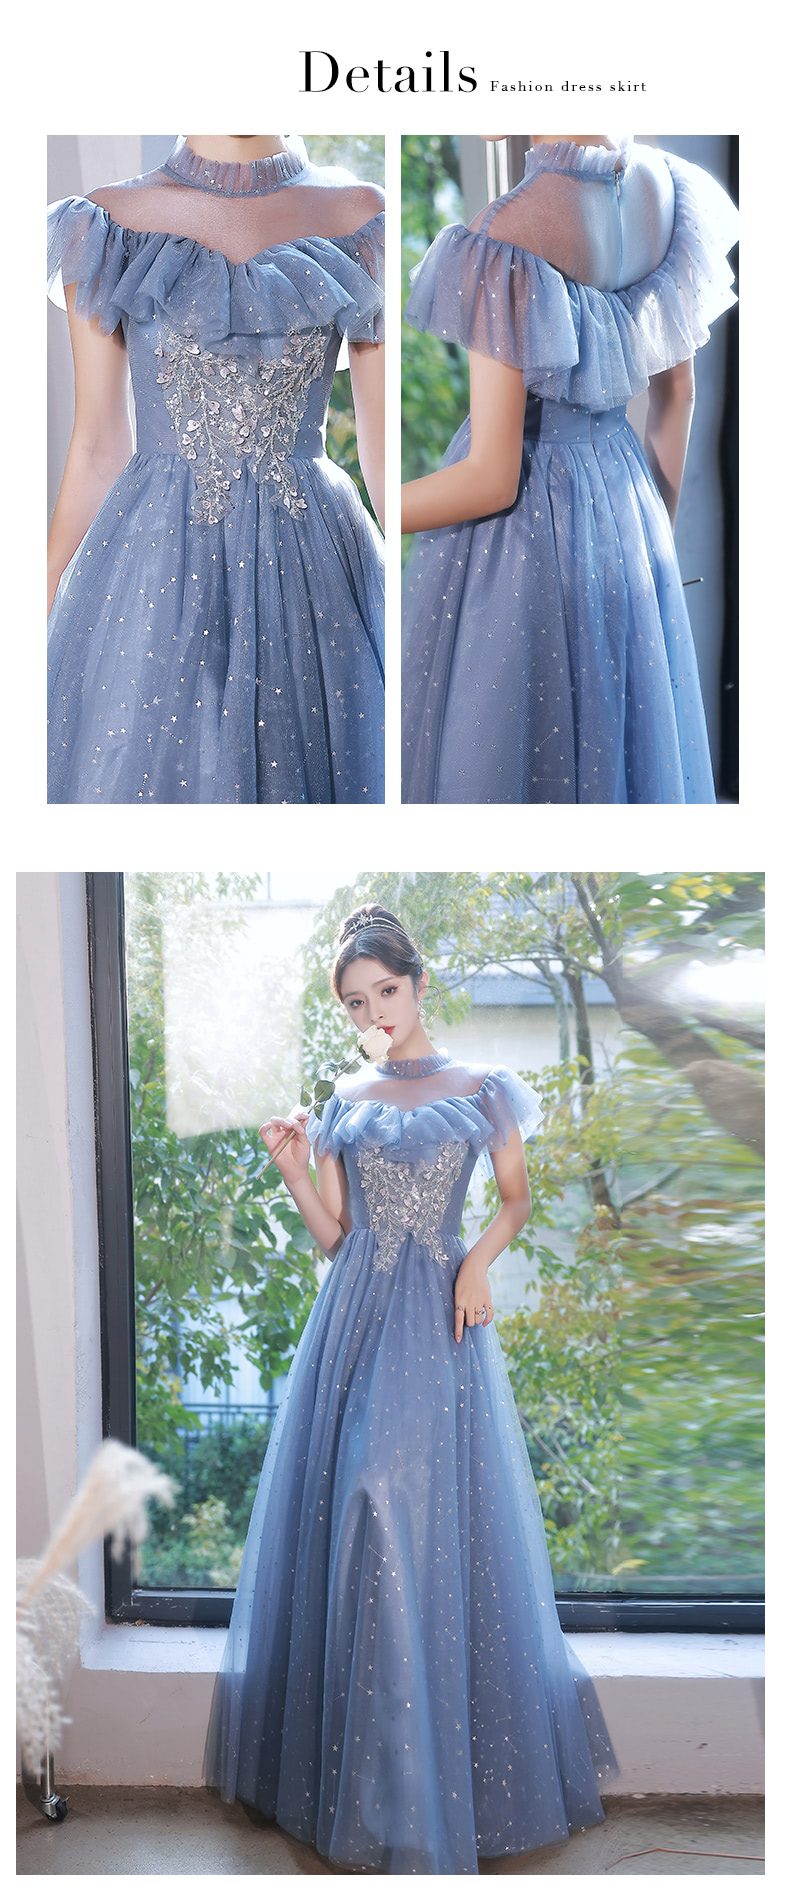 Fashion-Off-the-Shoulder-Long-Blue-Cocktail-Party-Prom-Dress14.jpg